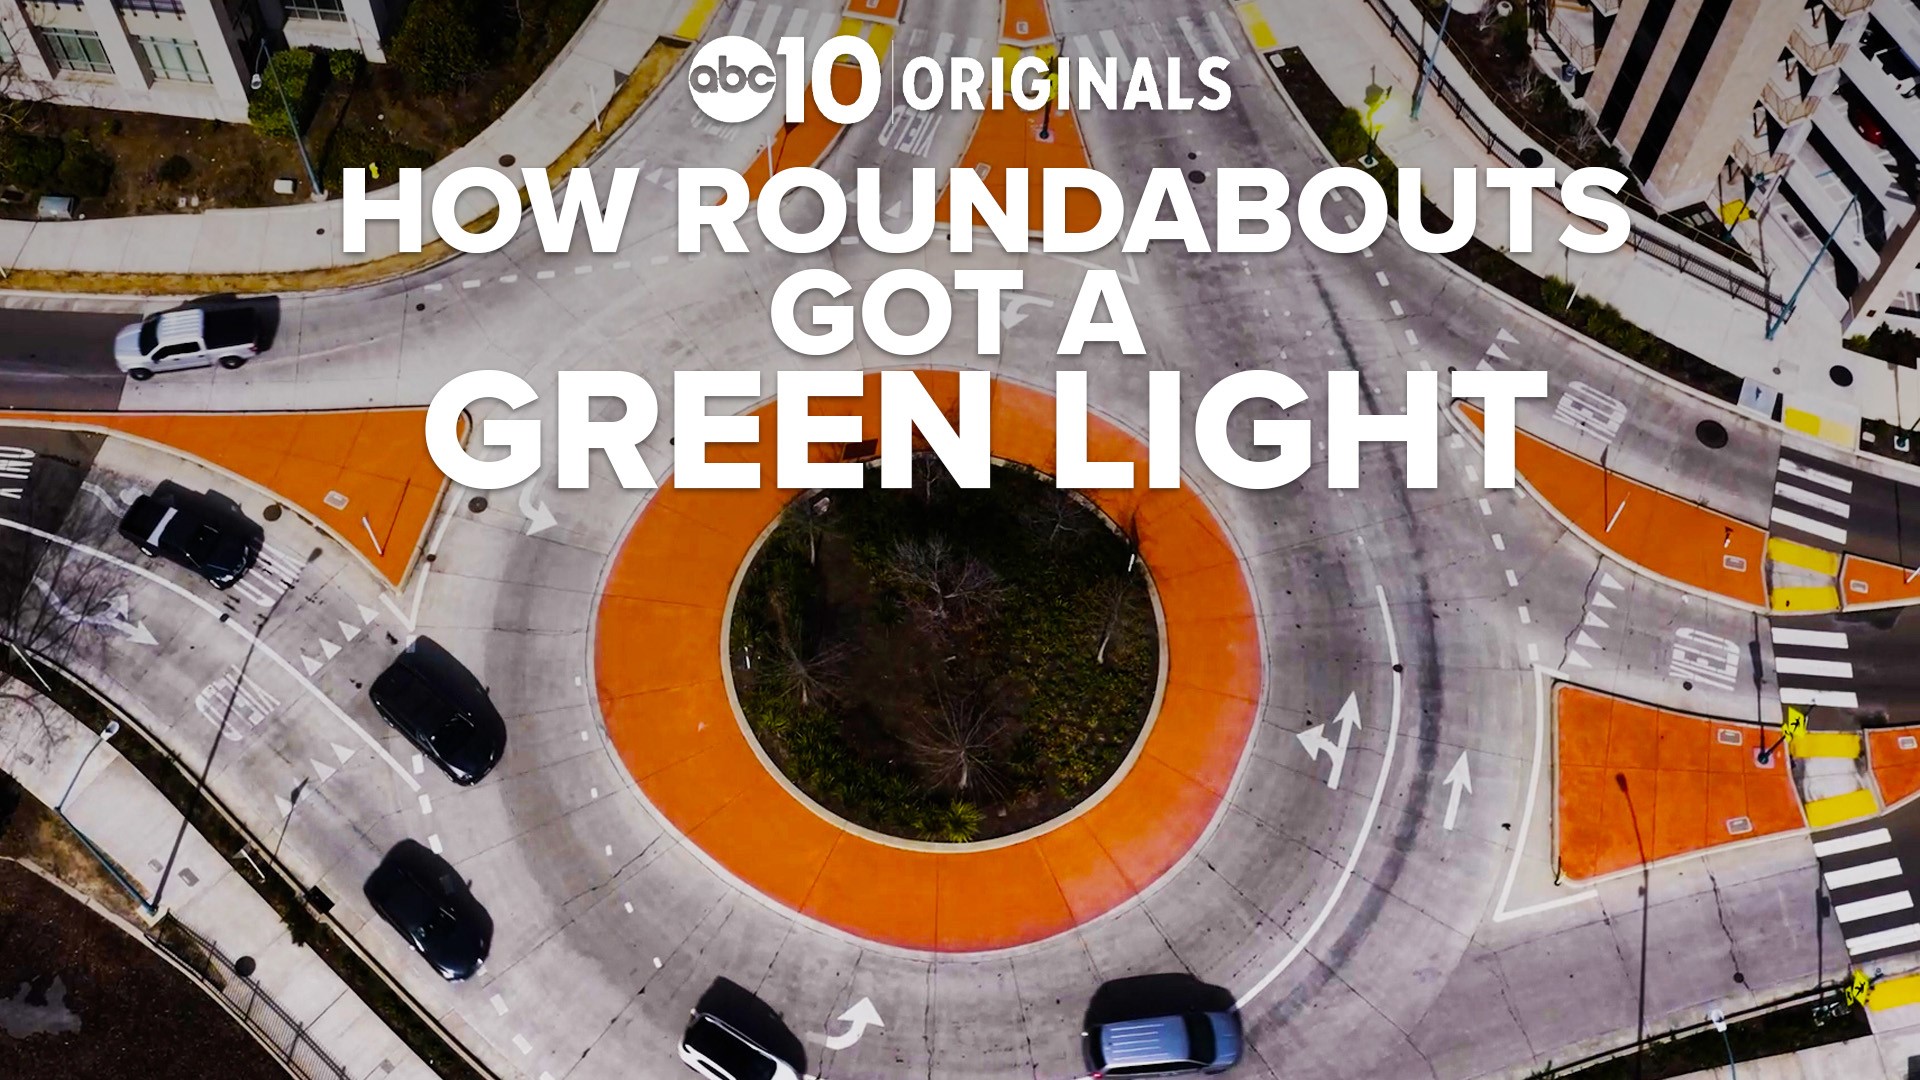 Love them or hate them, roundabouts are being used more and more for intersections and ABC10 wanted to know why.